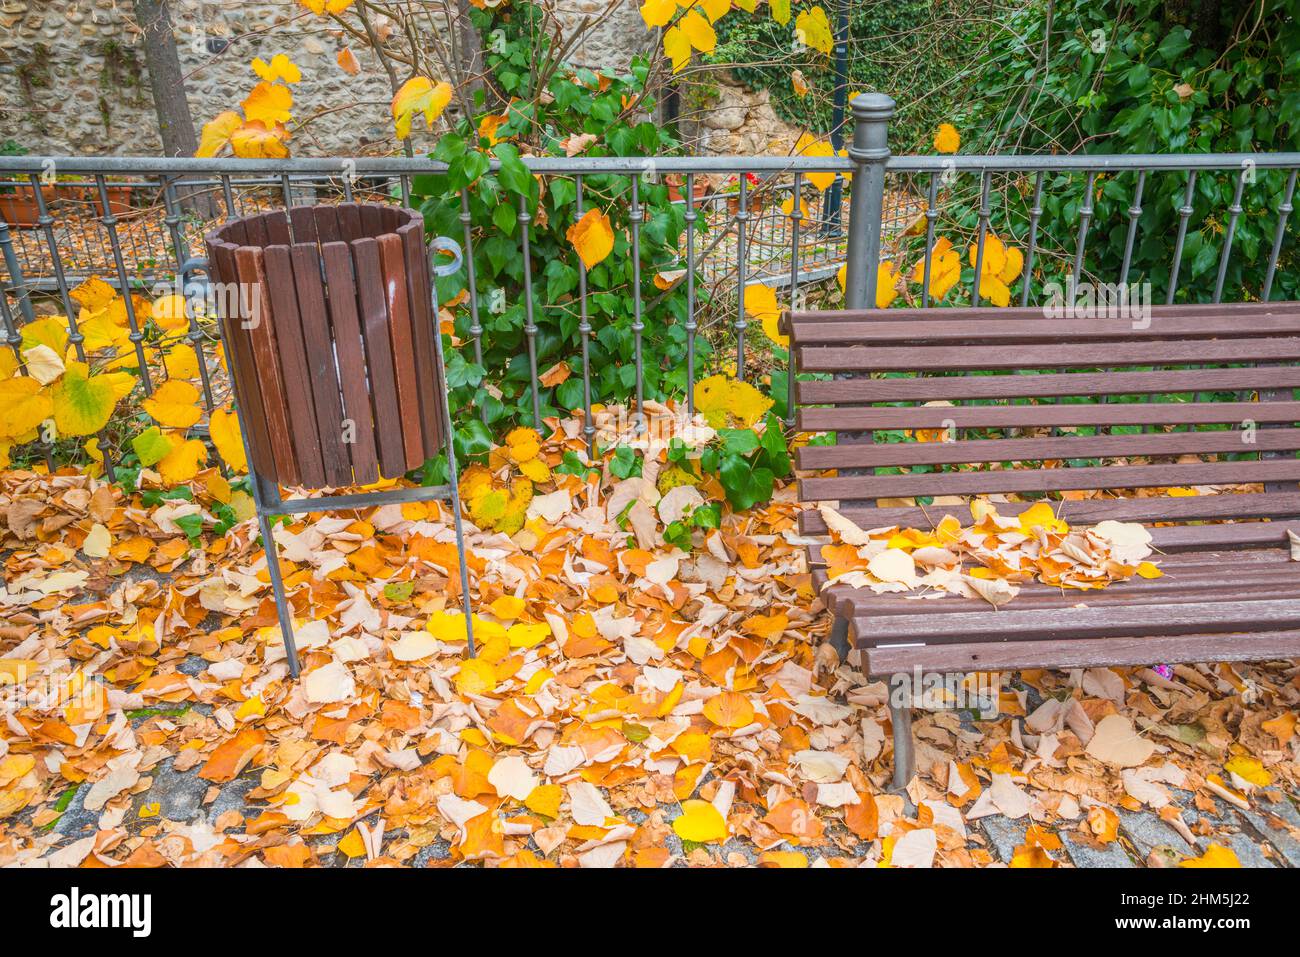 Bench and litter bin in Autumn. Stock Photo